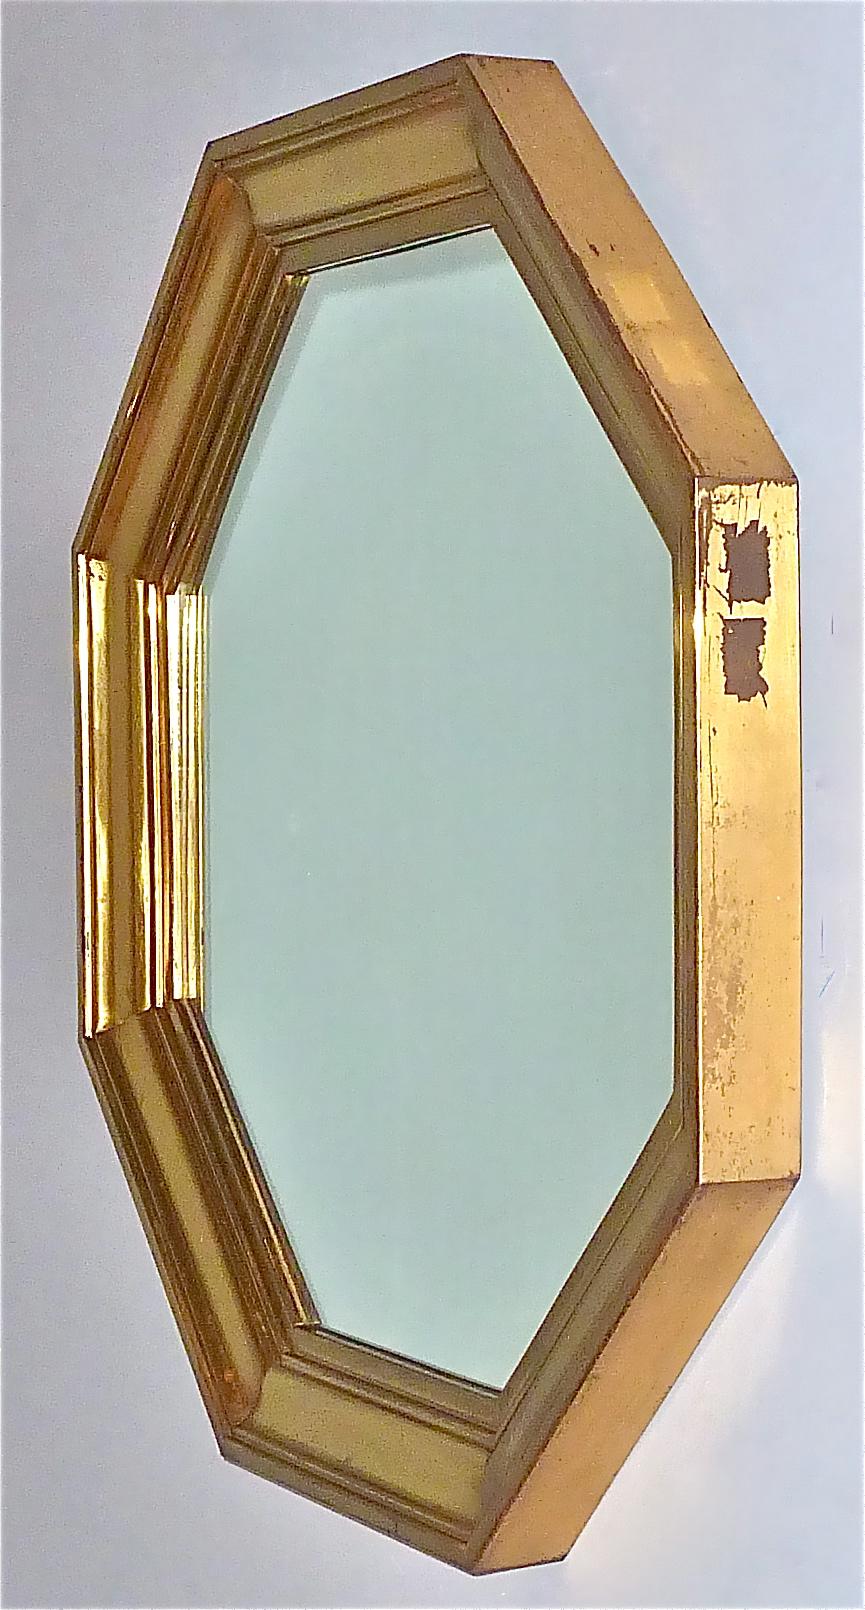 Large Maison Jansen Octagonal Patinated Brass Mirror Crespi Rizzo Style, 1970s For Sale 6